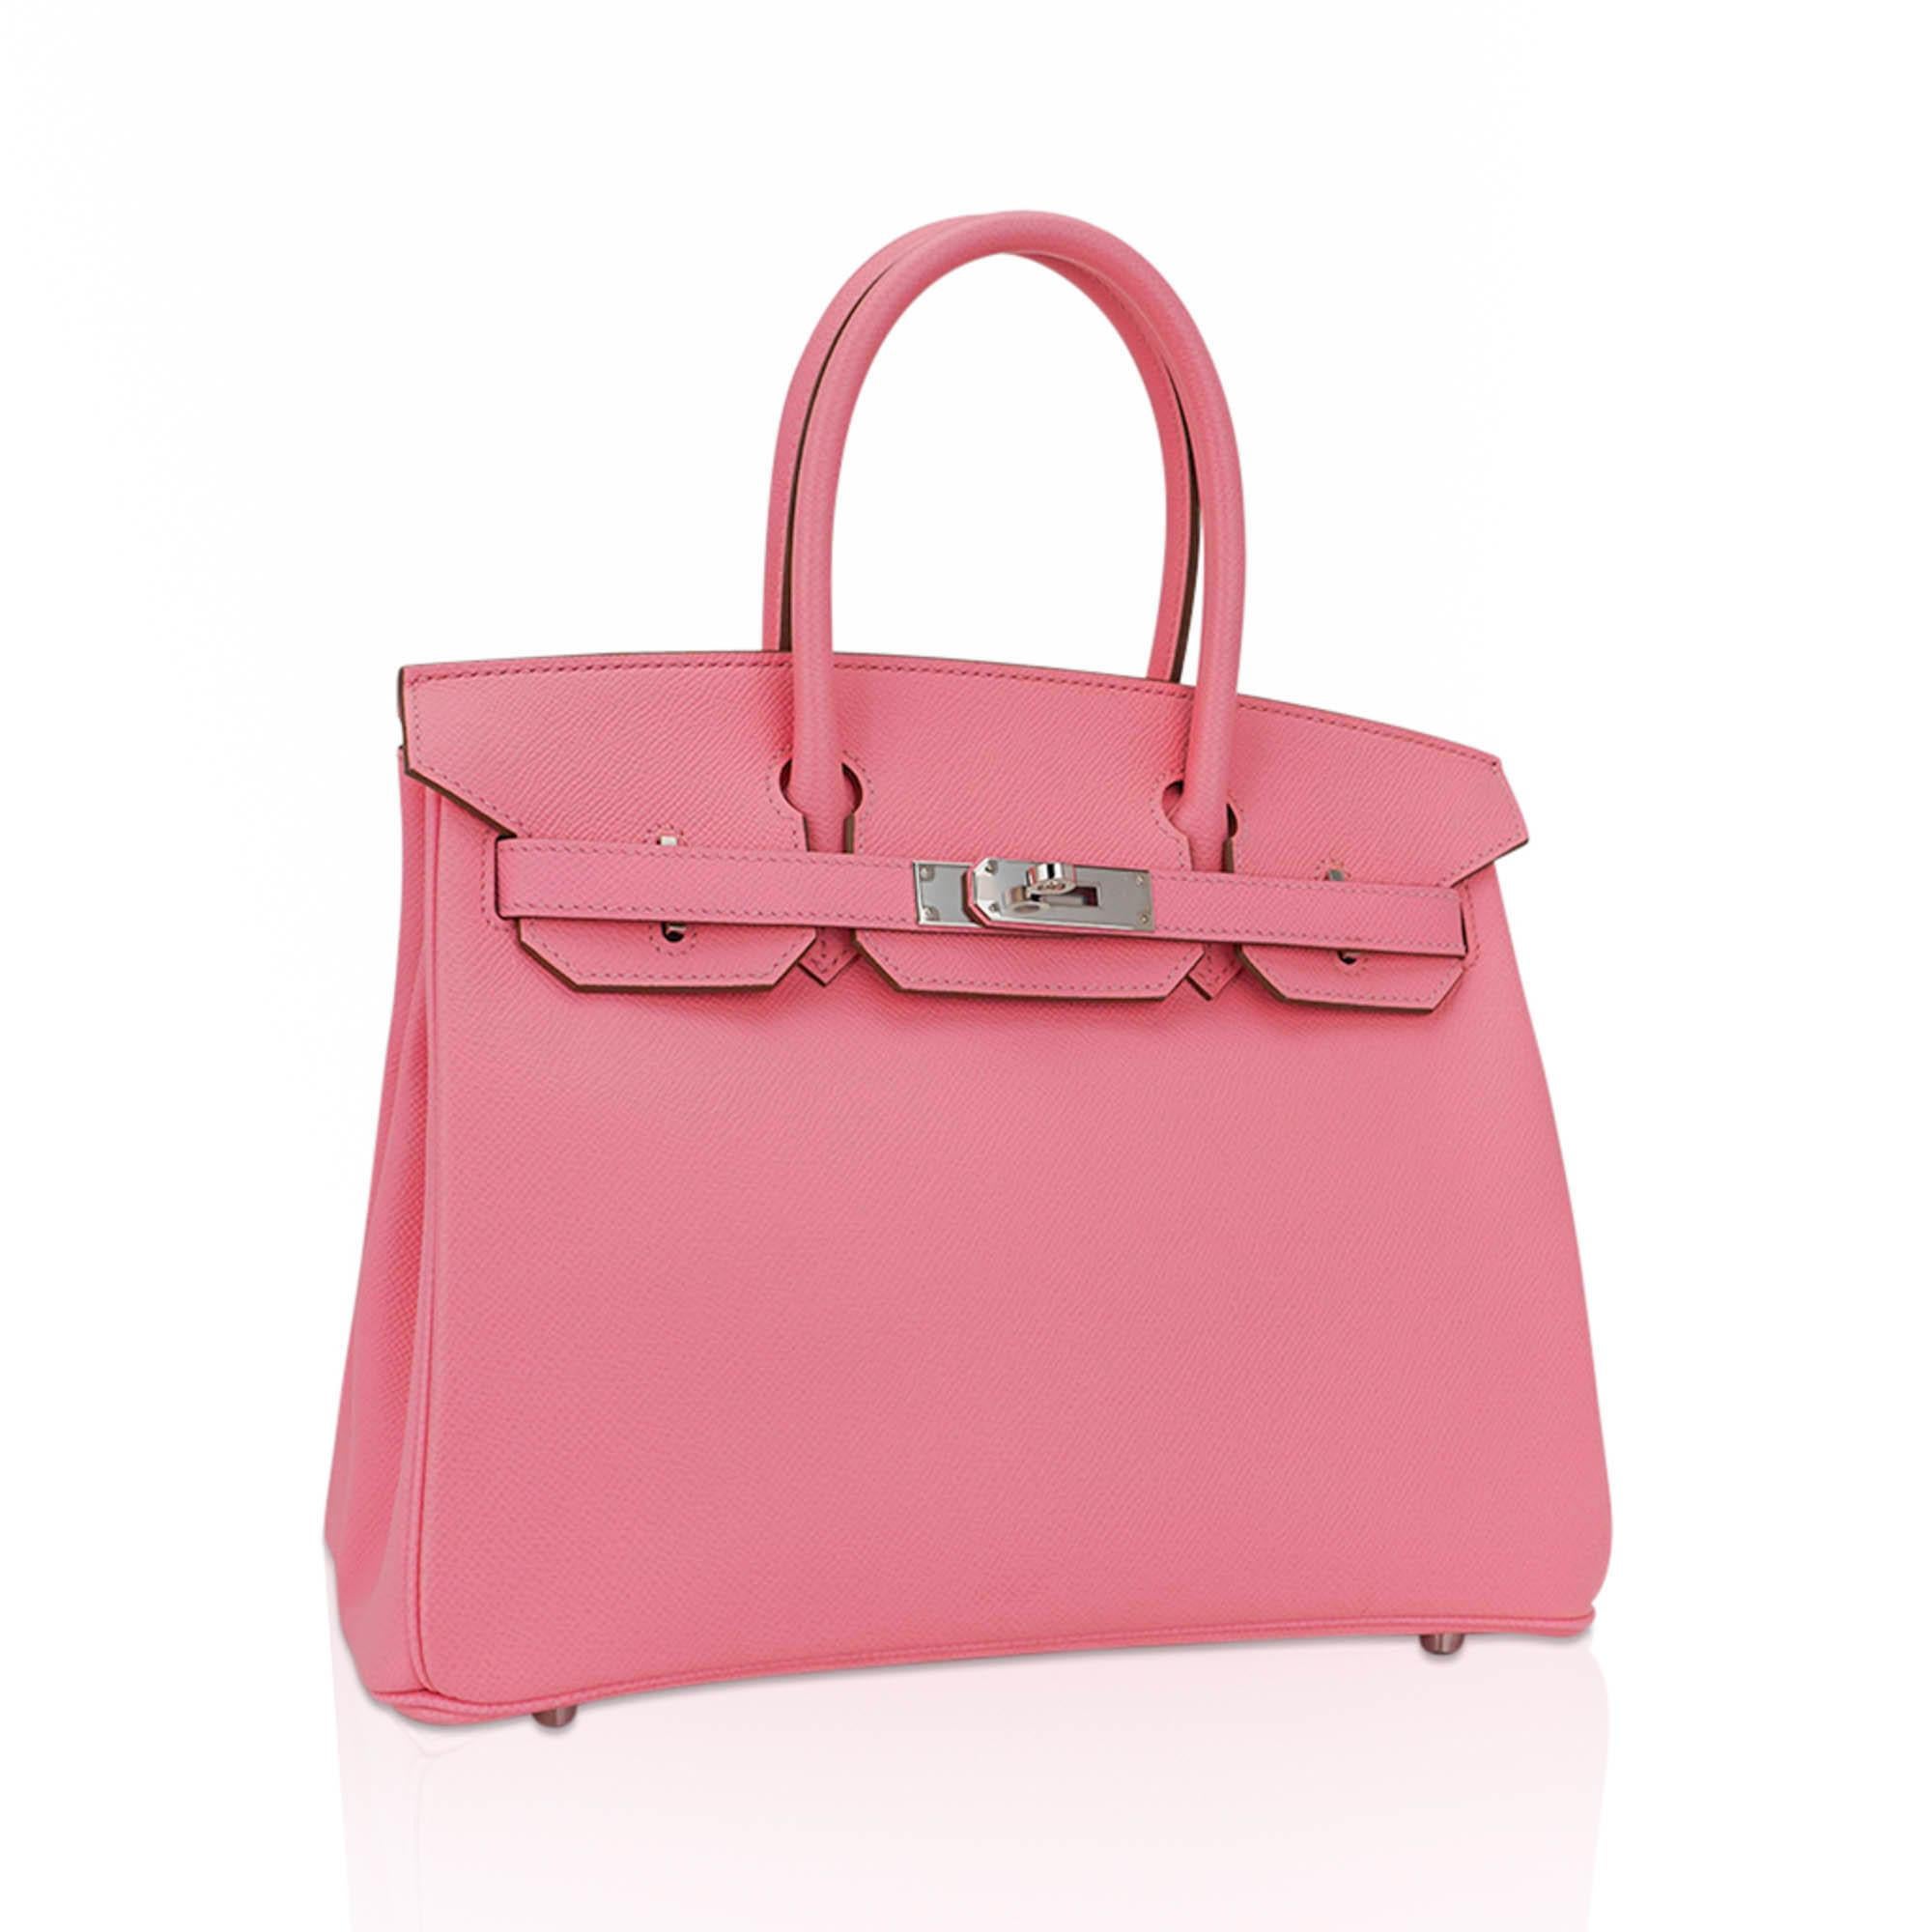 Mightychic offers an Hermes Birkin 30 bag featured in coveted Rose Confetti.
This exquisite Pink hue is rarely found today, and is an Hermes collectors dream!
Epsom leather with crisp Palladium hardware accentuates the beautiful colour of this